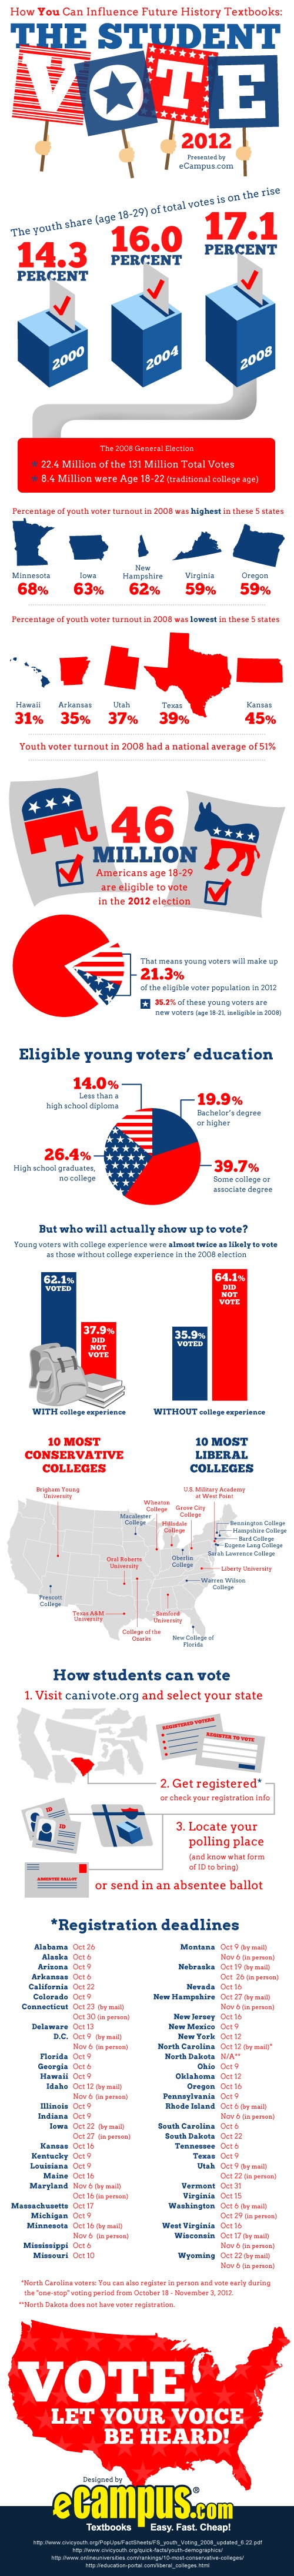 College Students and the 2012 Election